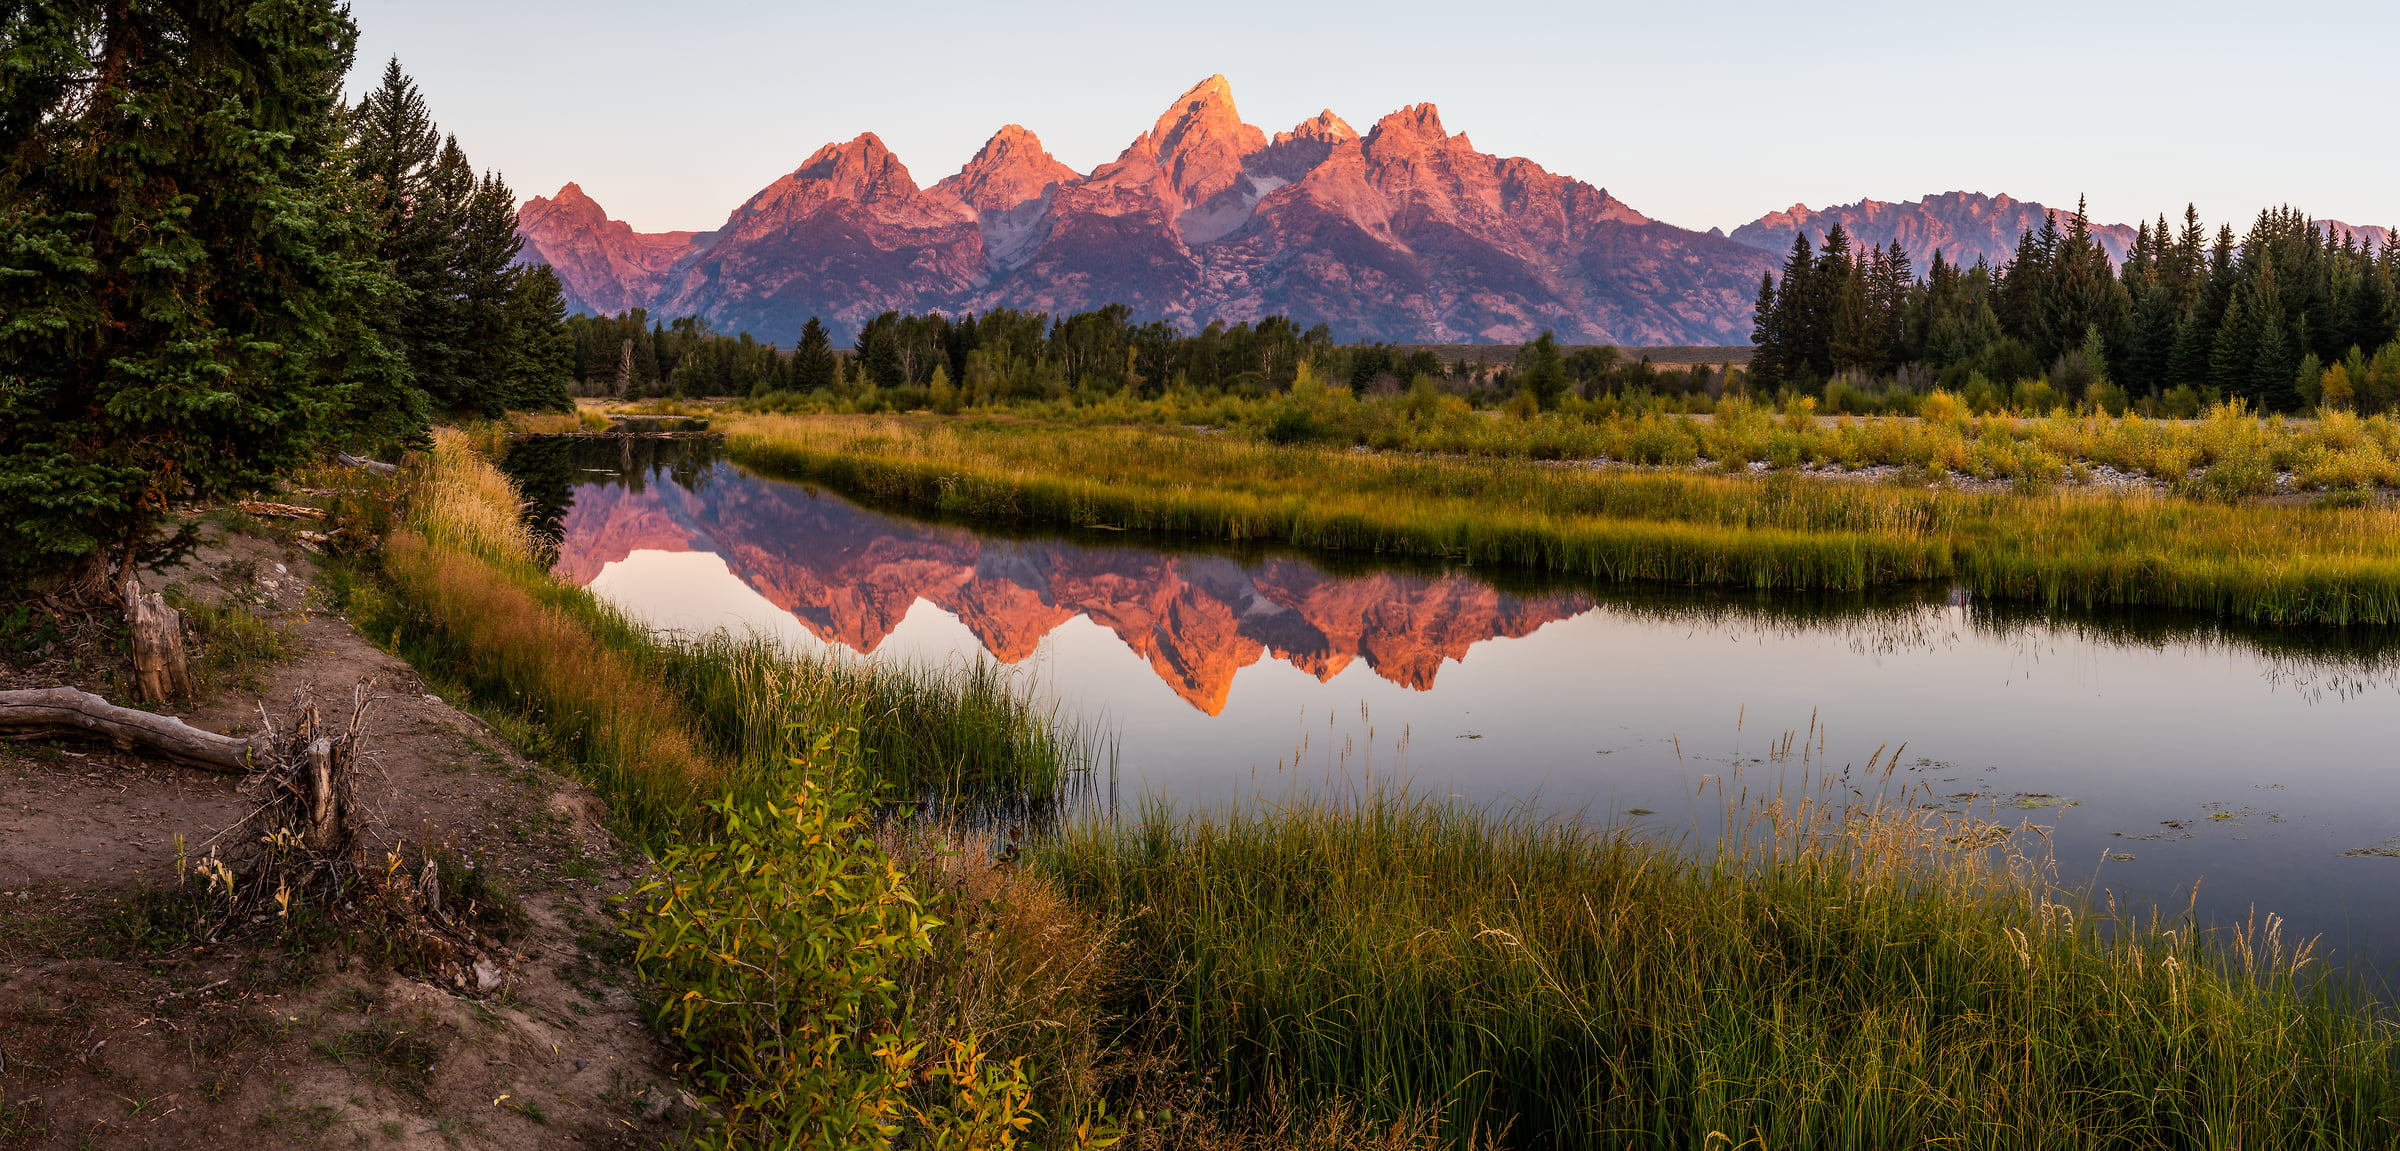 121 megapixels! A very high resolution, large-format VAST photo print of a landscape with mountains and a river; photograph created by Phillip Noll in Grand Teton National Park, Wyoming